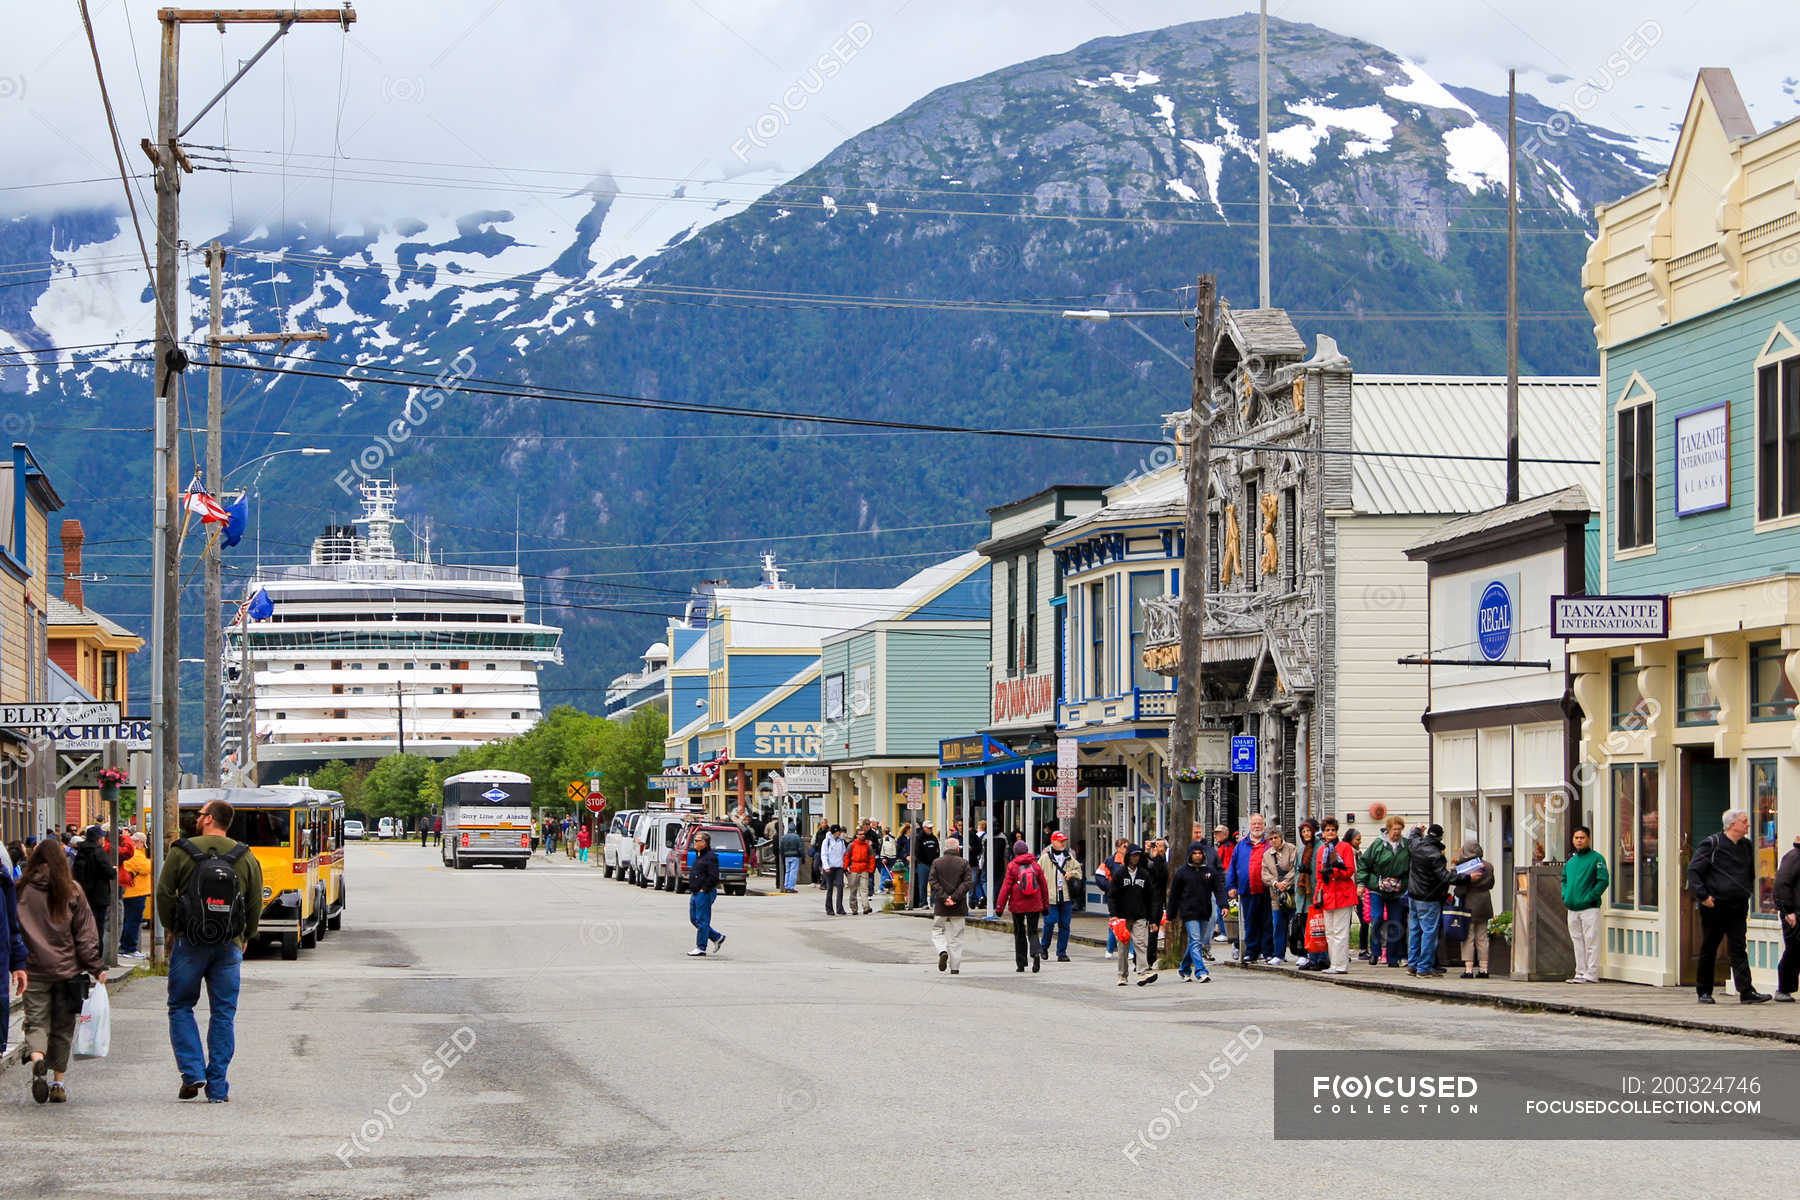 🔥 Free Download Usa Alaska Skagway Center Of City Skagway Cruise Ship At 1800x1200 For Your